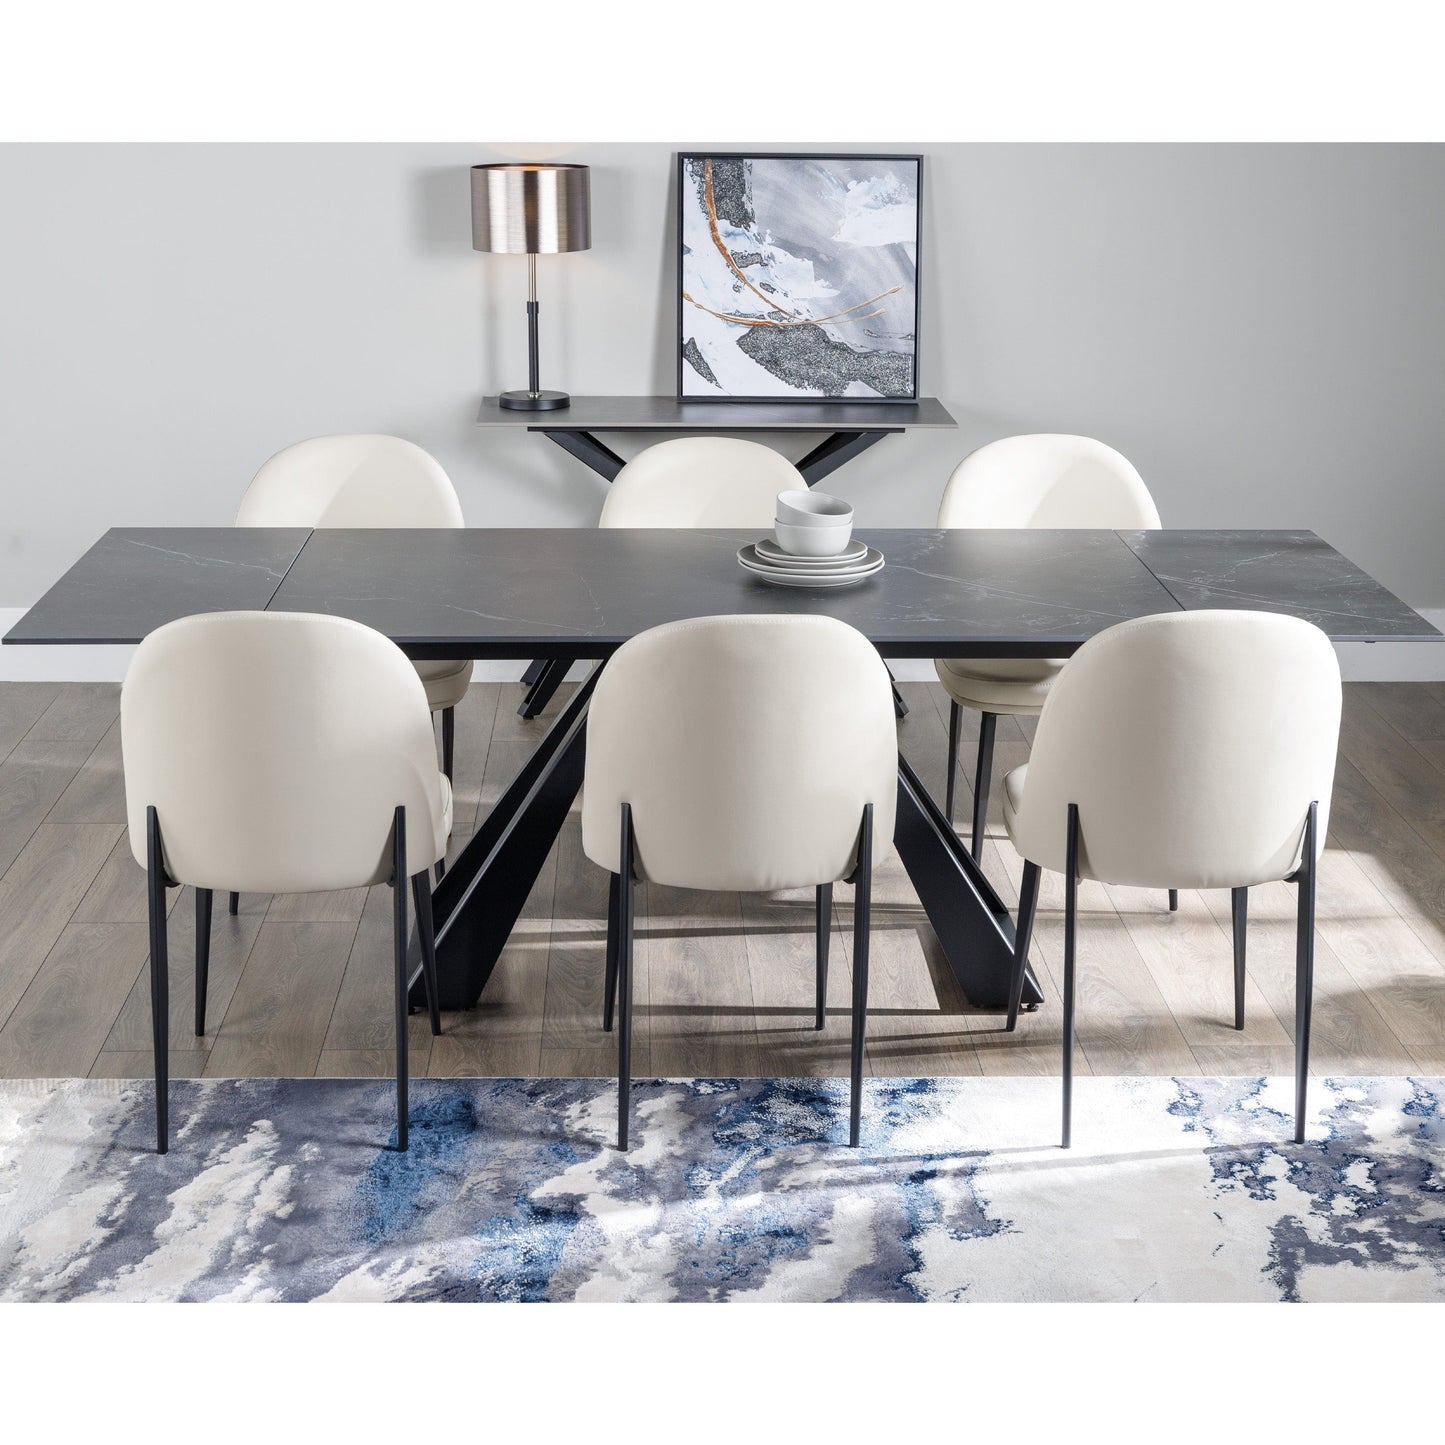 Furniture  -  Vortex Marble Dining Table Set with 6 Chairs  -  60003719